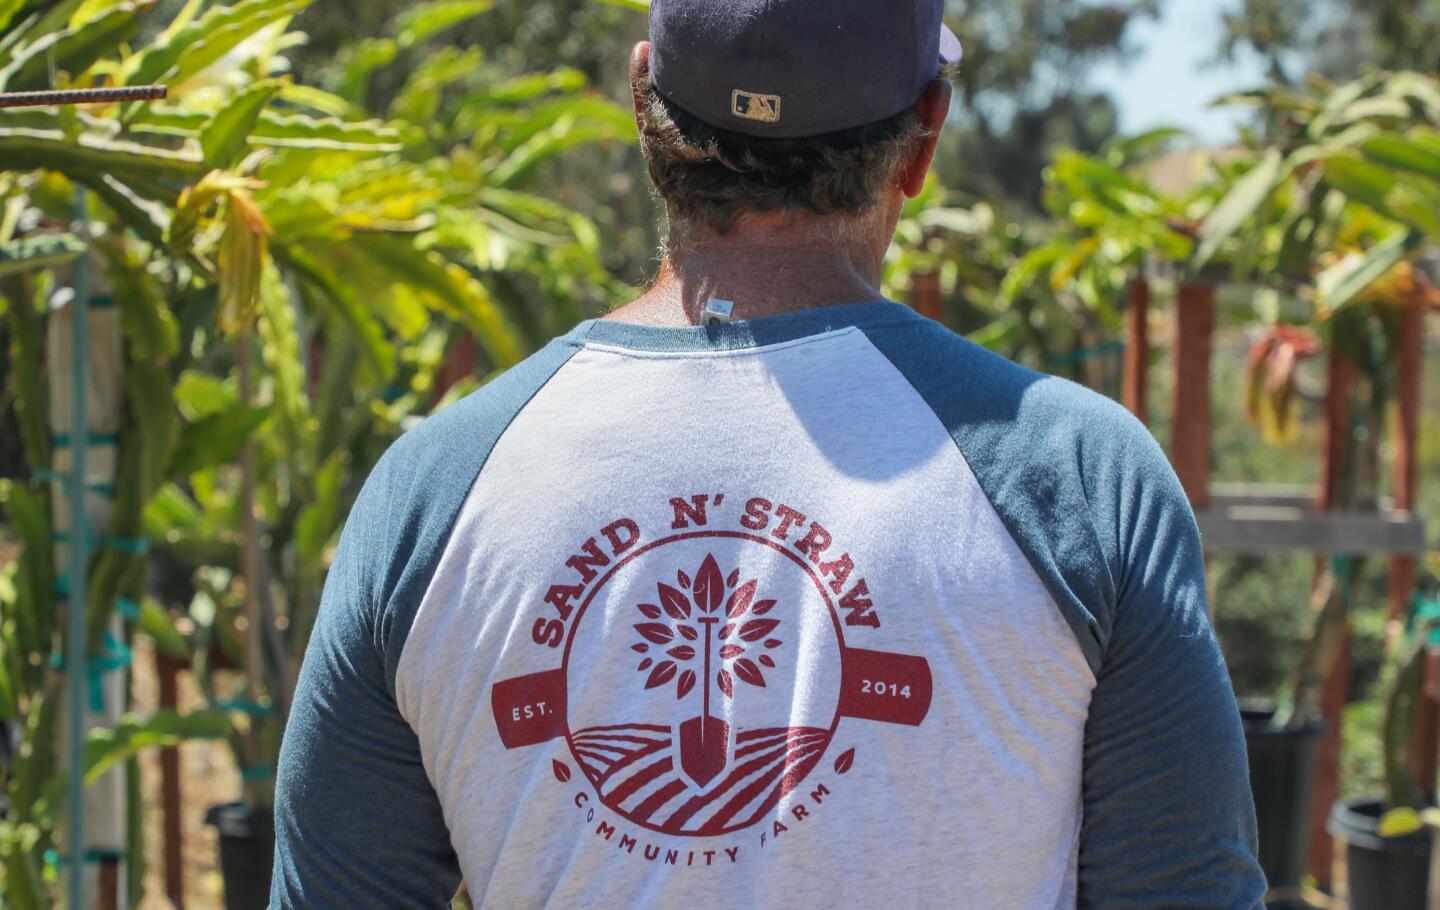 The logo of Sand N' Straw Community Farm is on the back of co-owner Richard Viles as he walks through rows of Dragon Fruit plants.